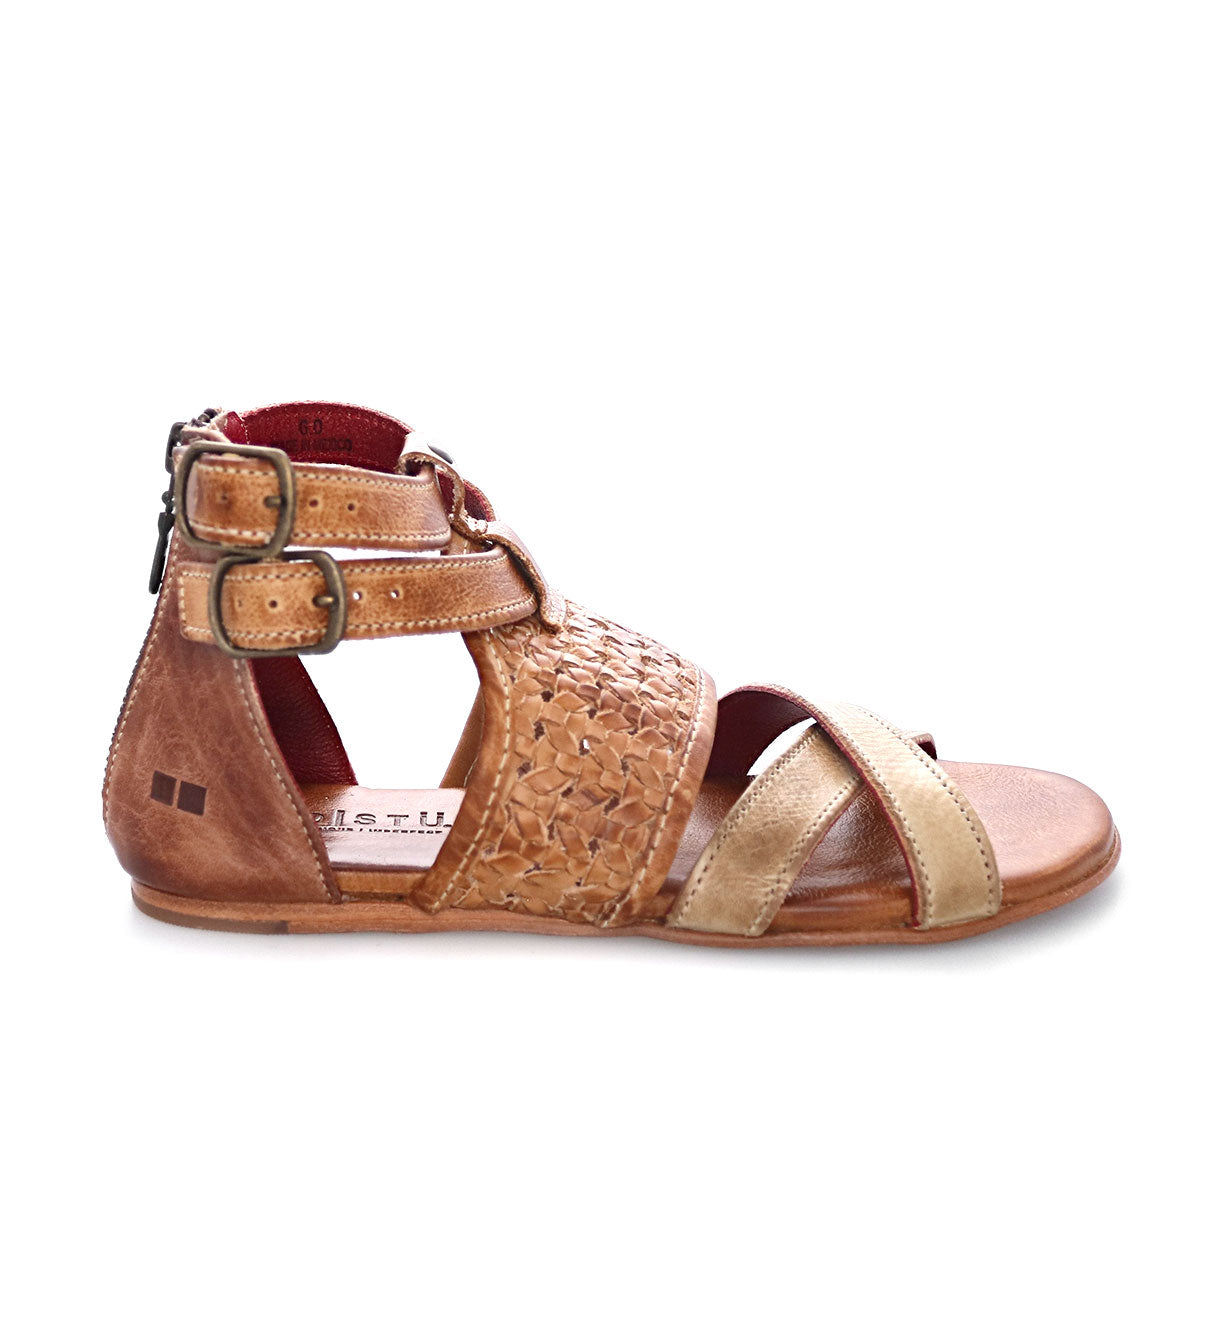 A women's Capriana sandal with two straps and a buckle by Bed Stu.